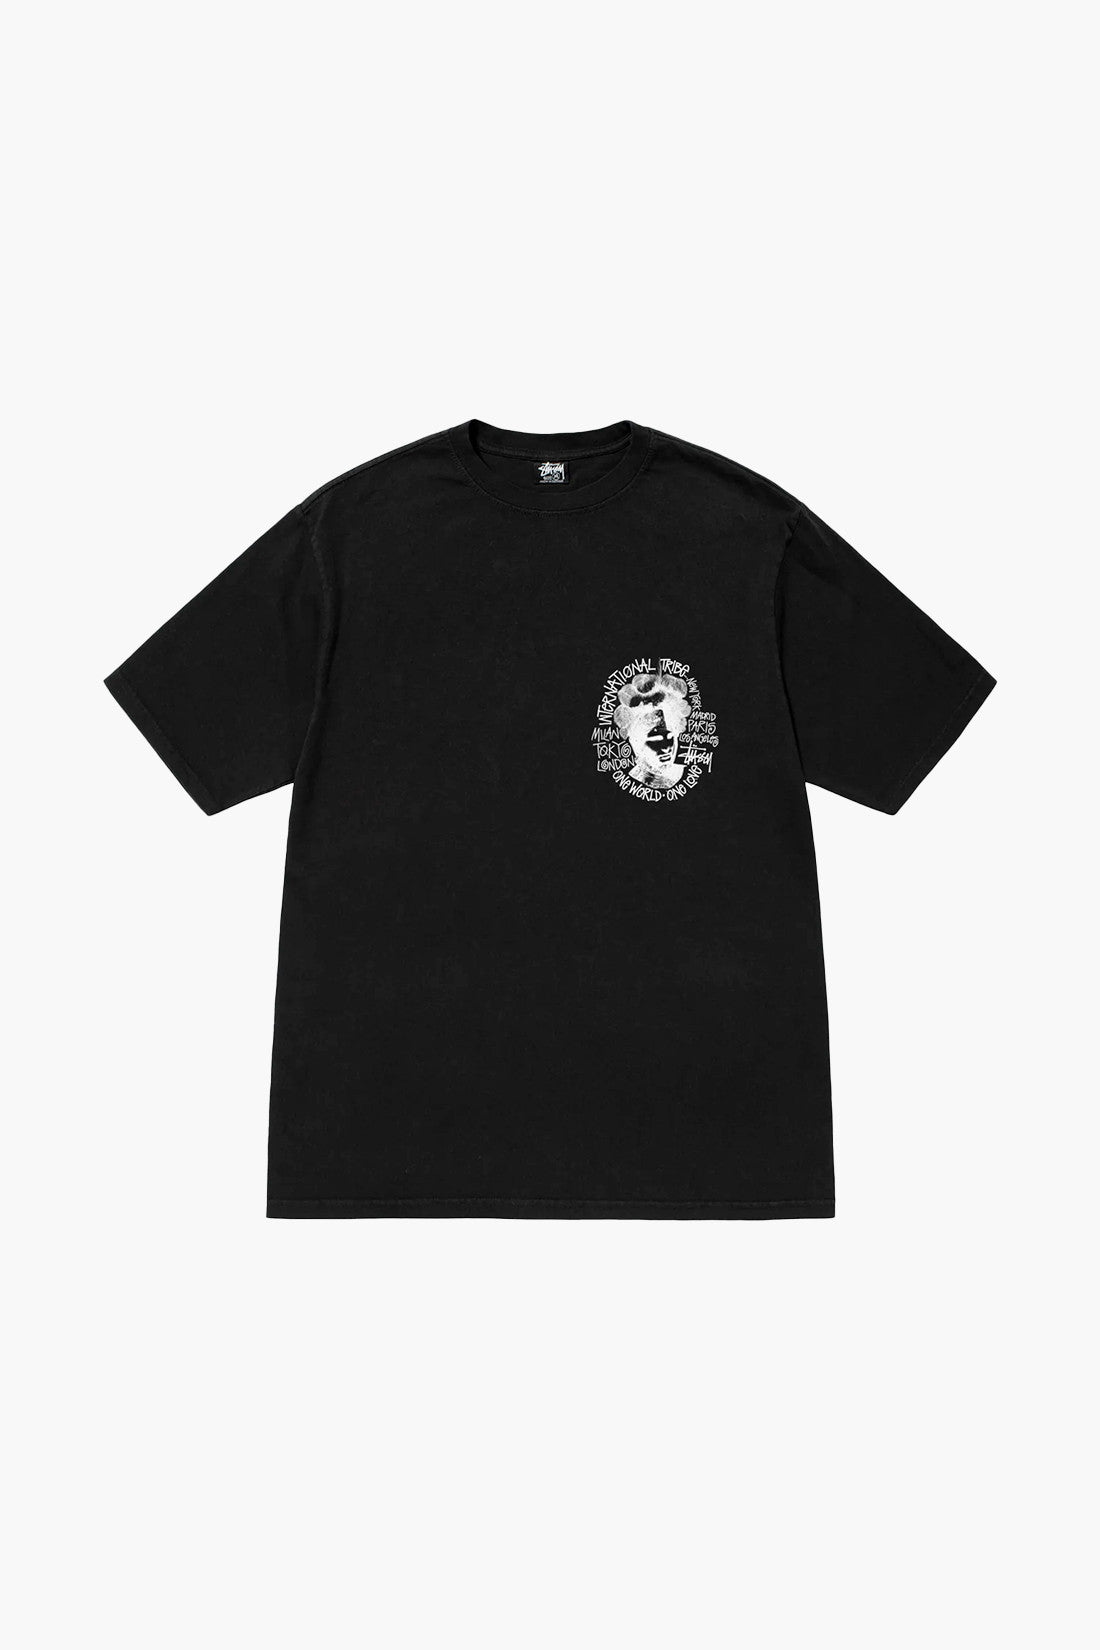 STUSSY CAMELOT PIG DYED TEE